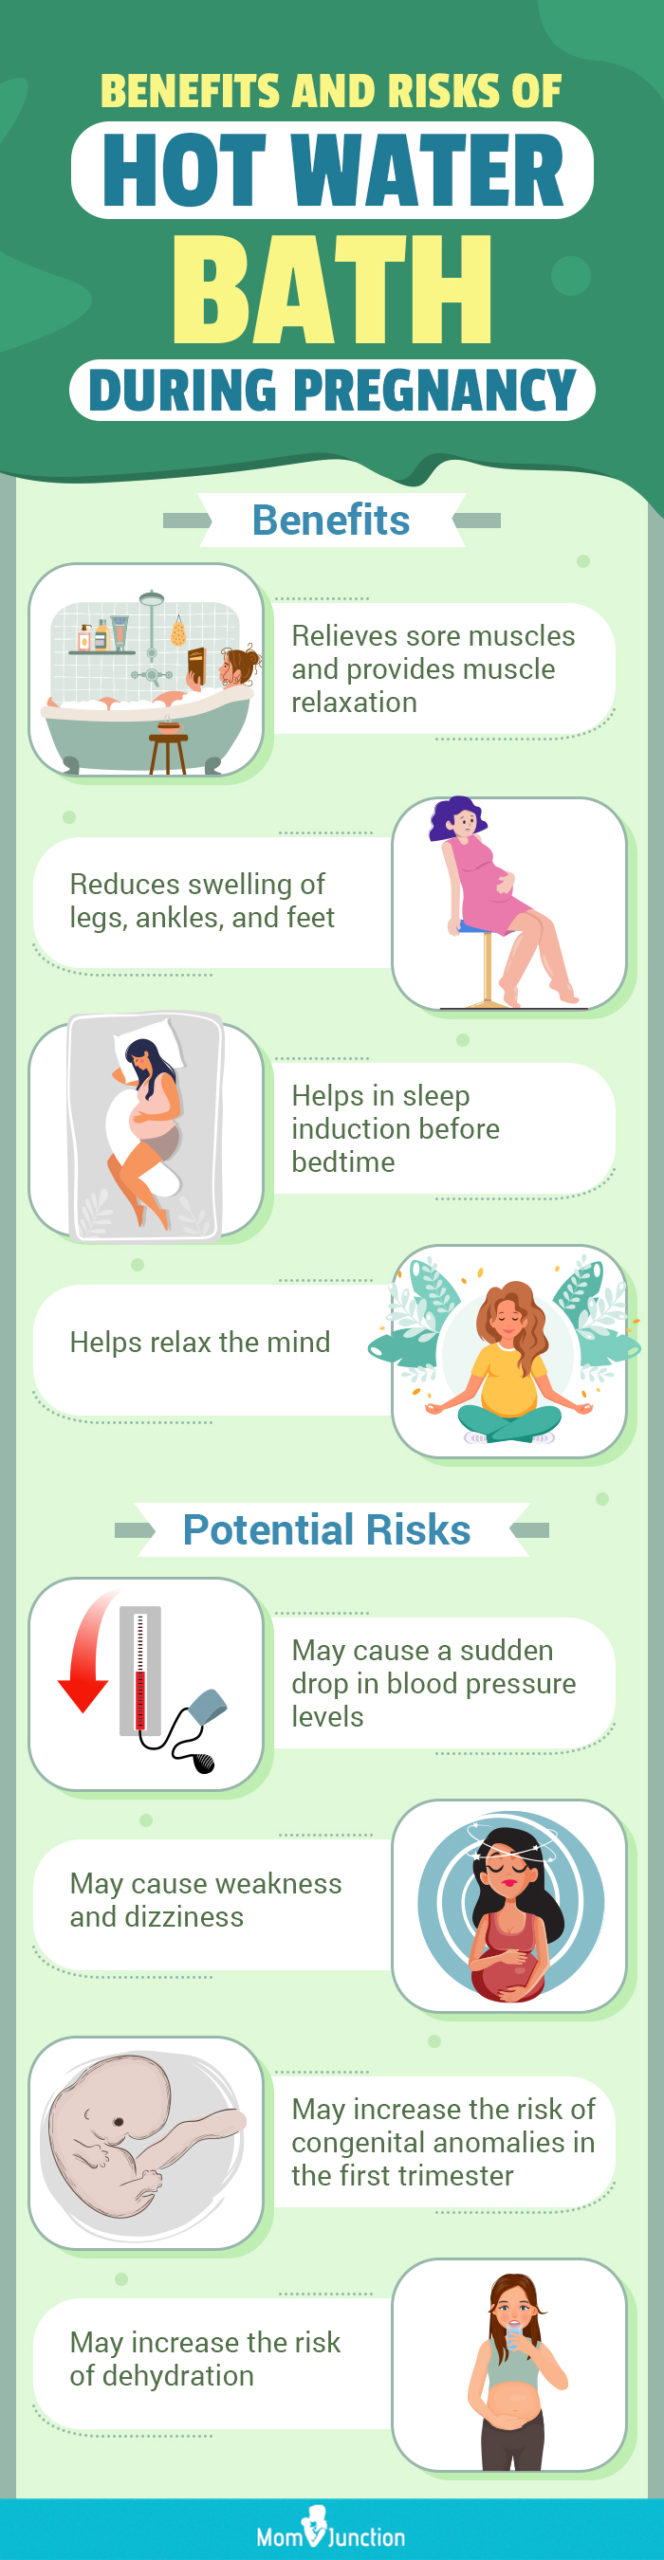 benefits and risks of hot water bath during pregnancy (infographic) 